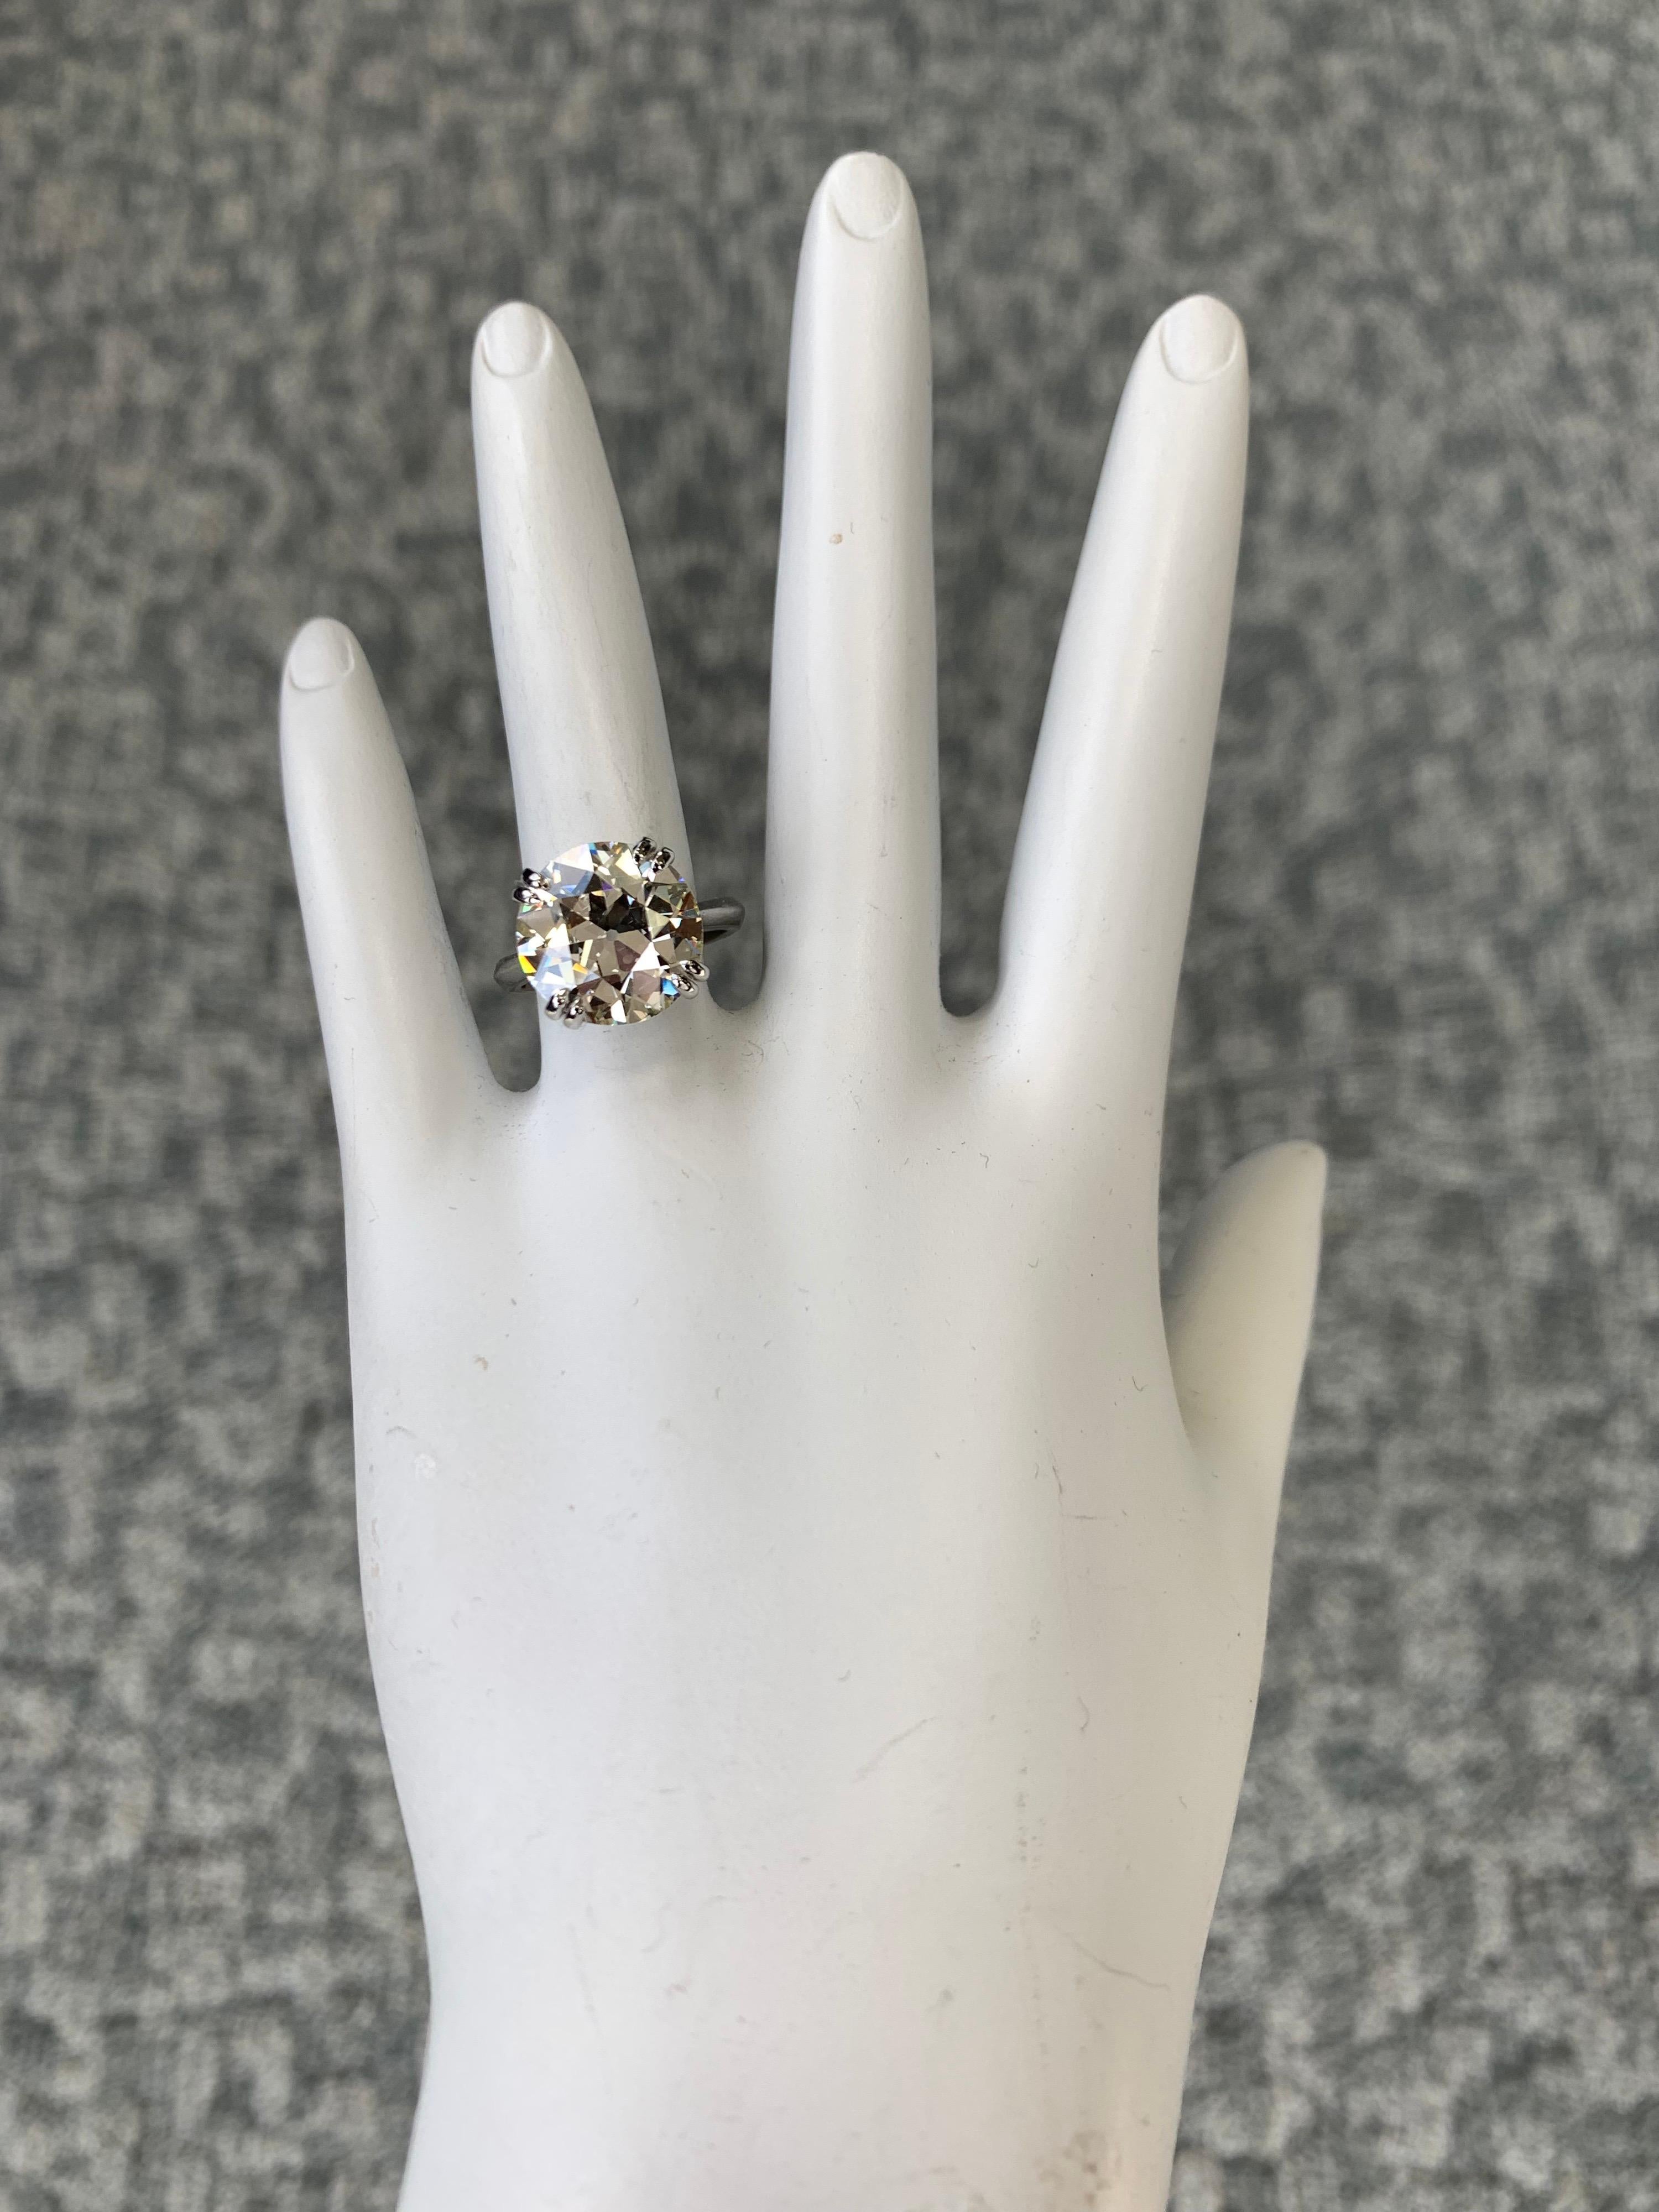 ring size 5.5 in europe